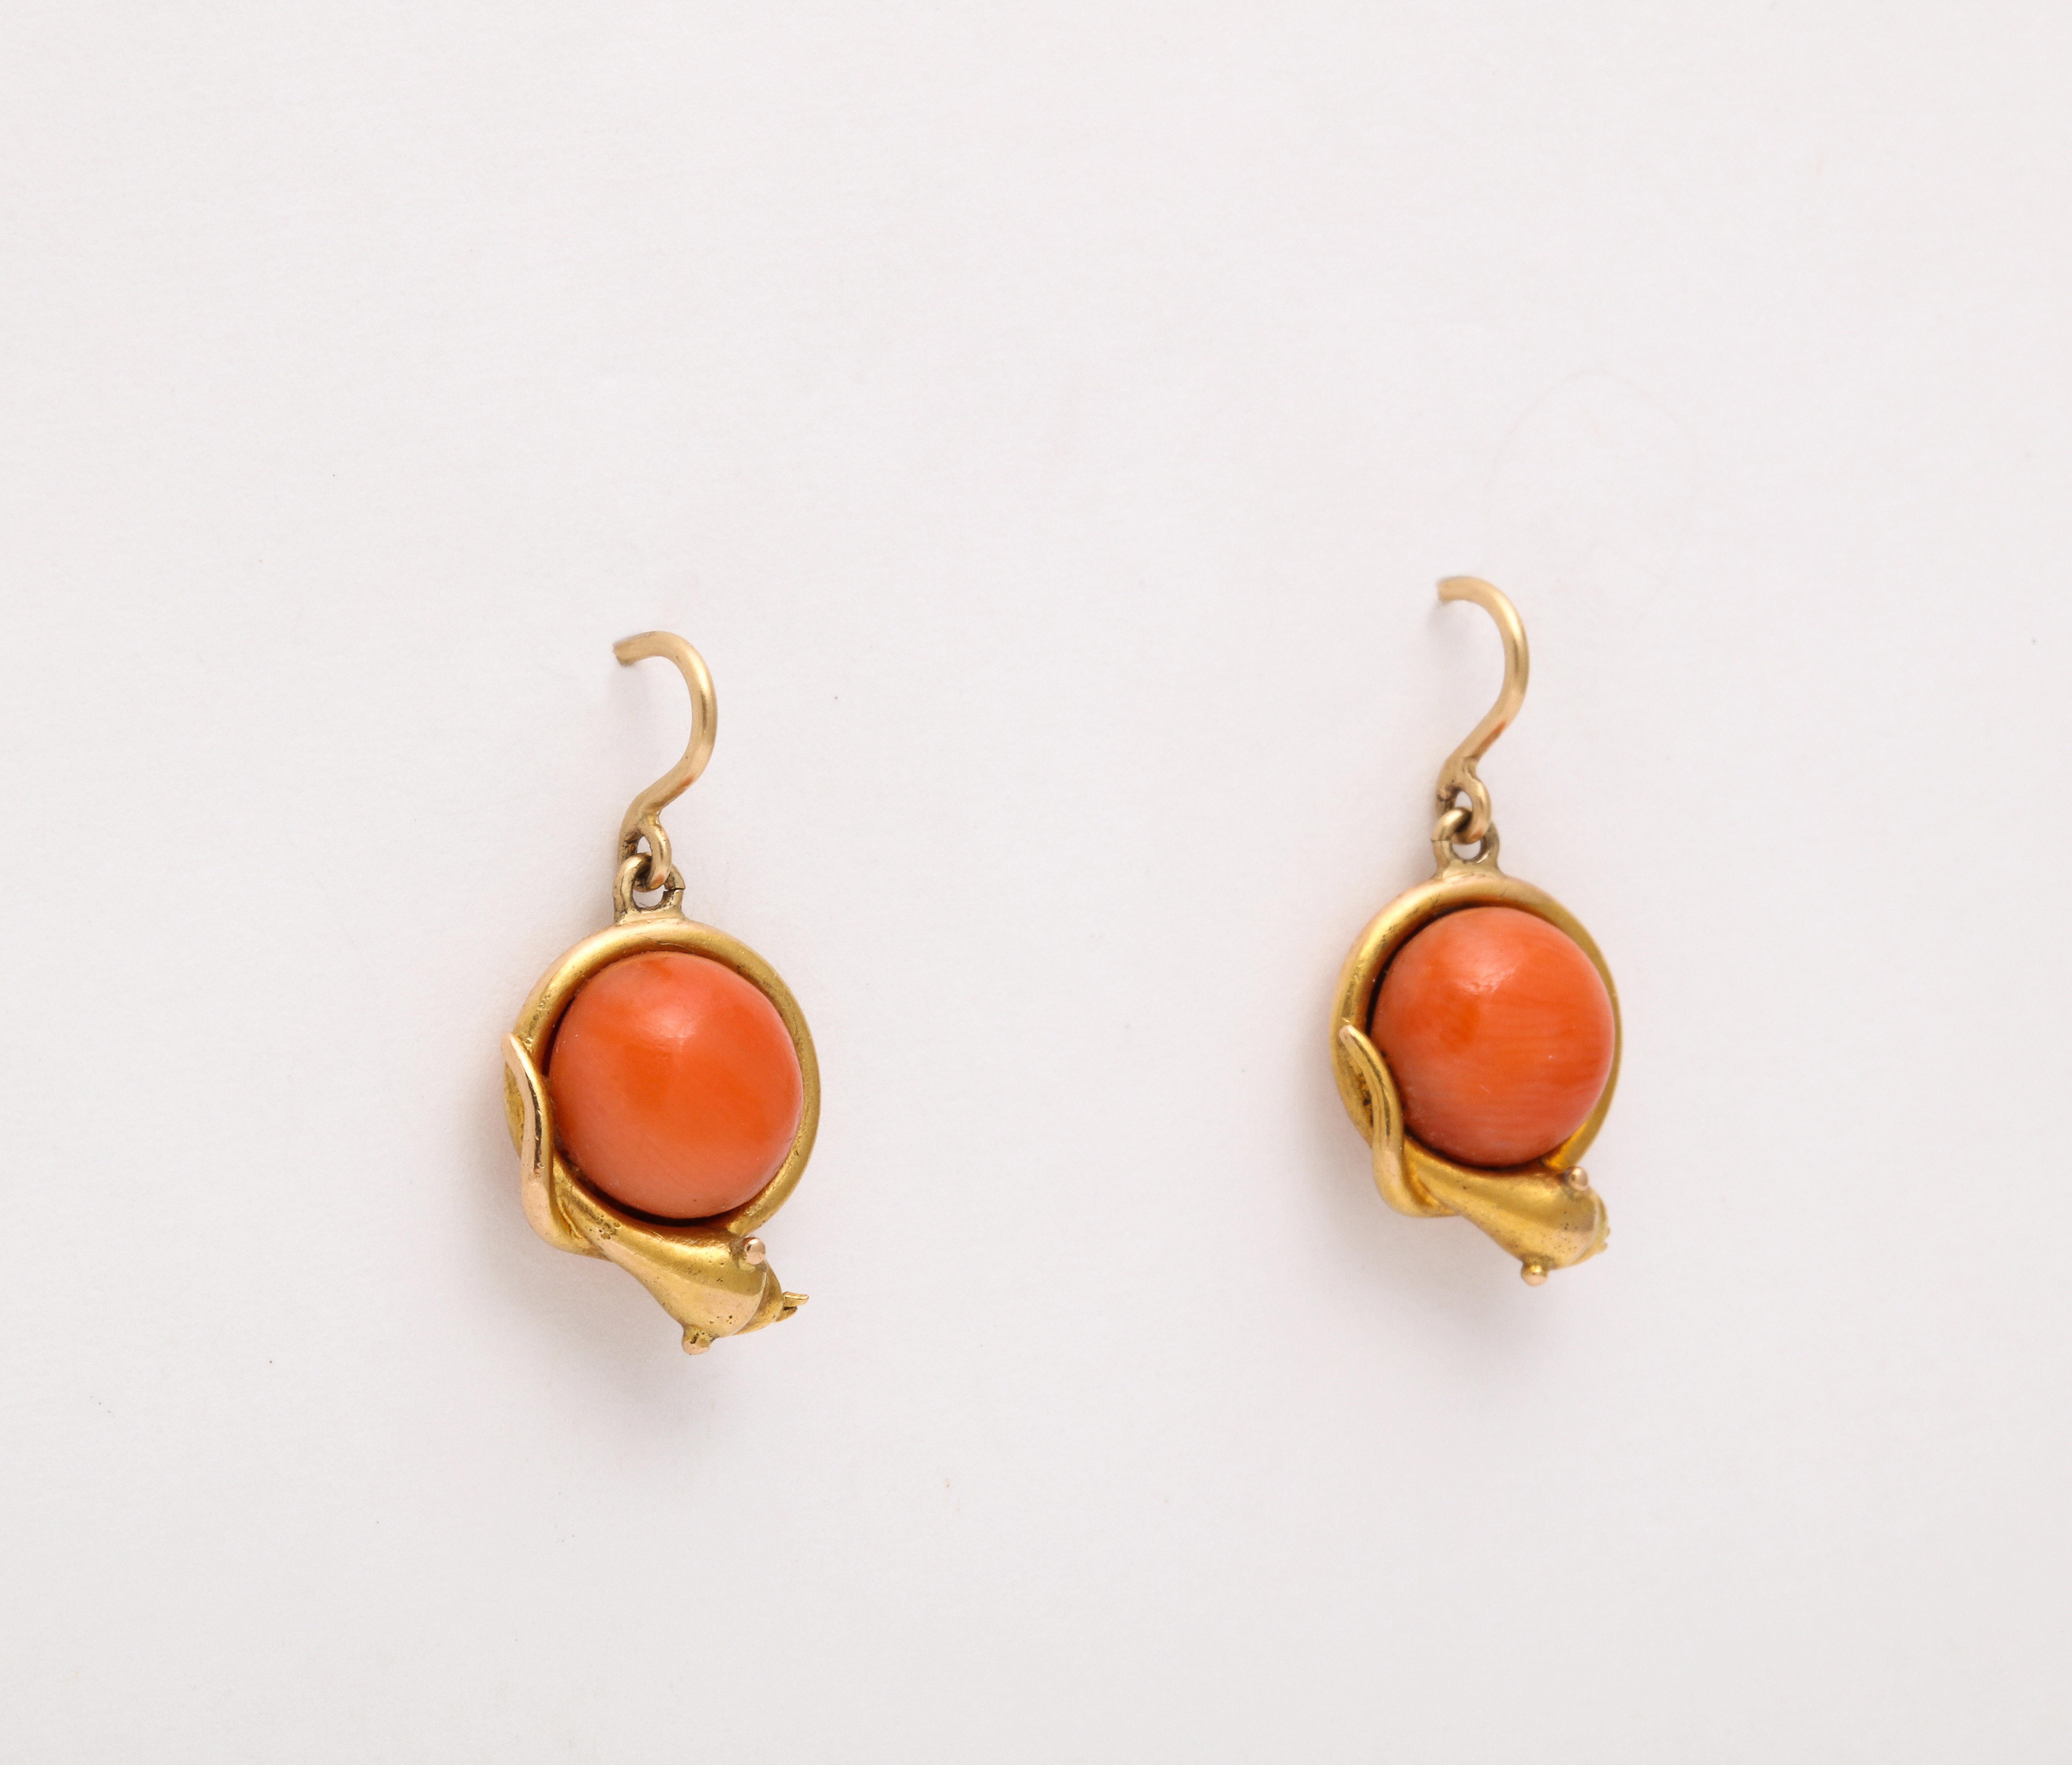 When little ear drops with an orb of color suit your day, here are 14 Kt gold Victorian natural coral earrings cuddled with in a serpent frame. Serpents have been symbolic throughout history. In the Georgian and Victorian periods snakes with their